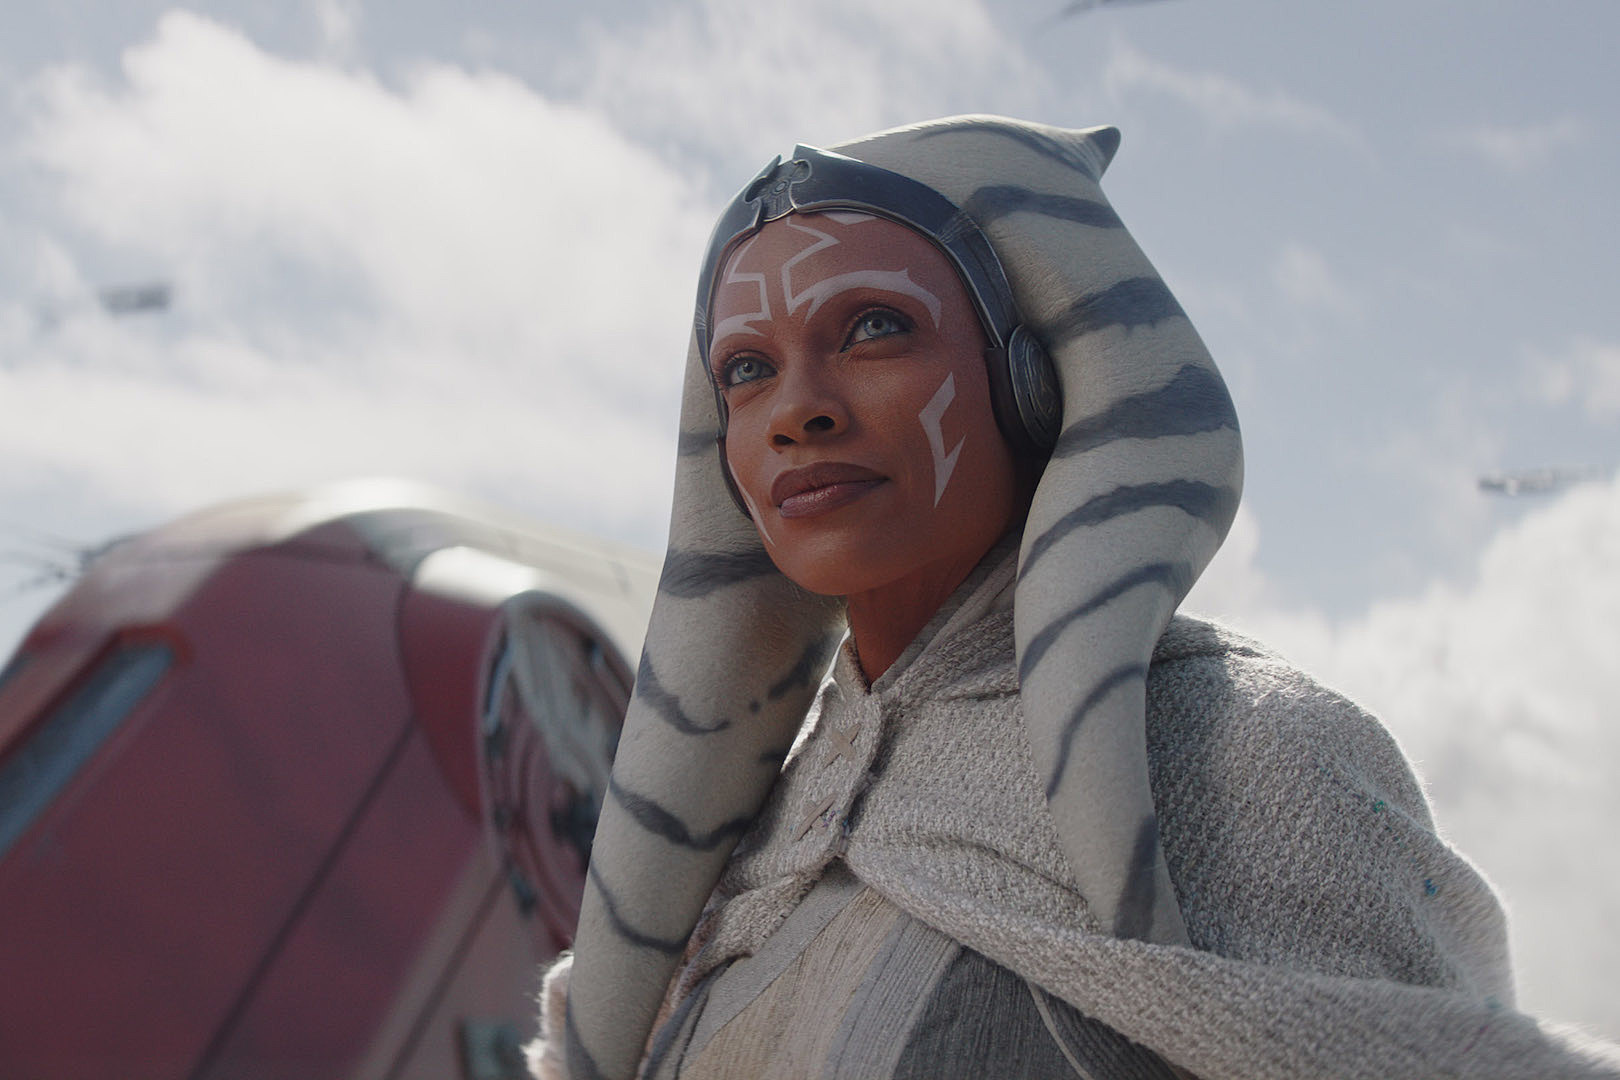 Female Fans Go Viral With Videos Showing How They Love Star Wars